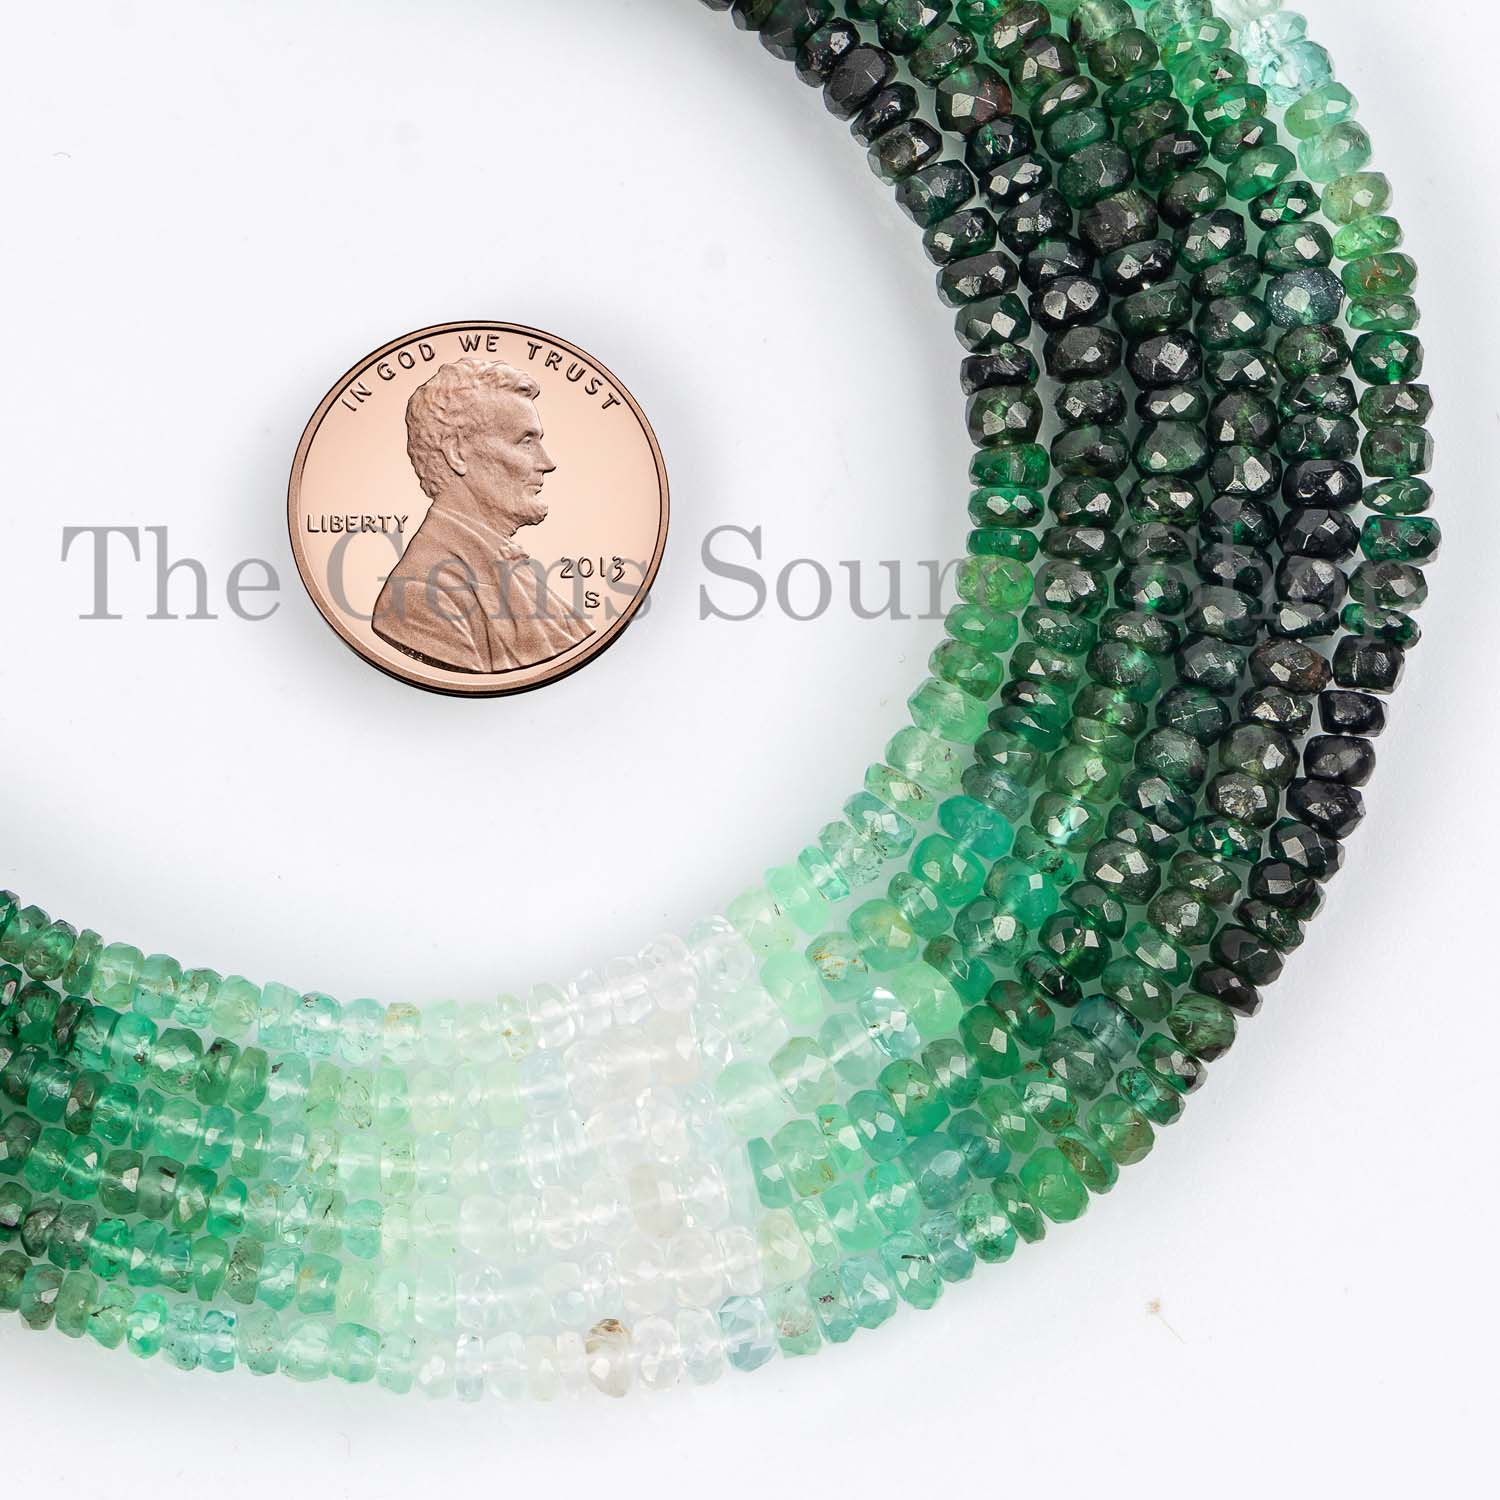 Shaded Emerald Beads, Faceted Rondelle Beads, Shaded Emerald Gemstone Beads, Wholesale Beads